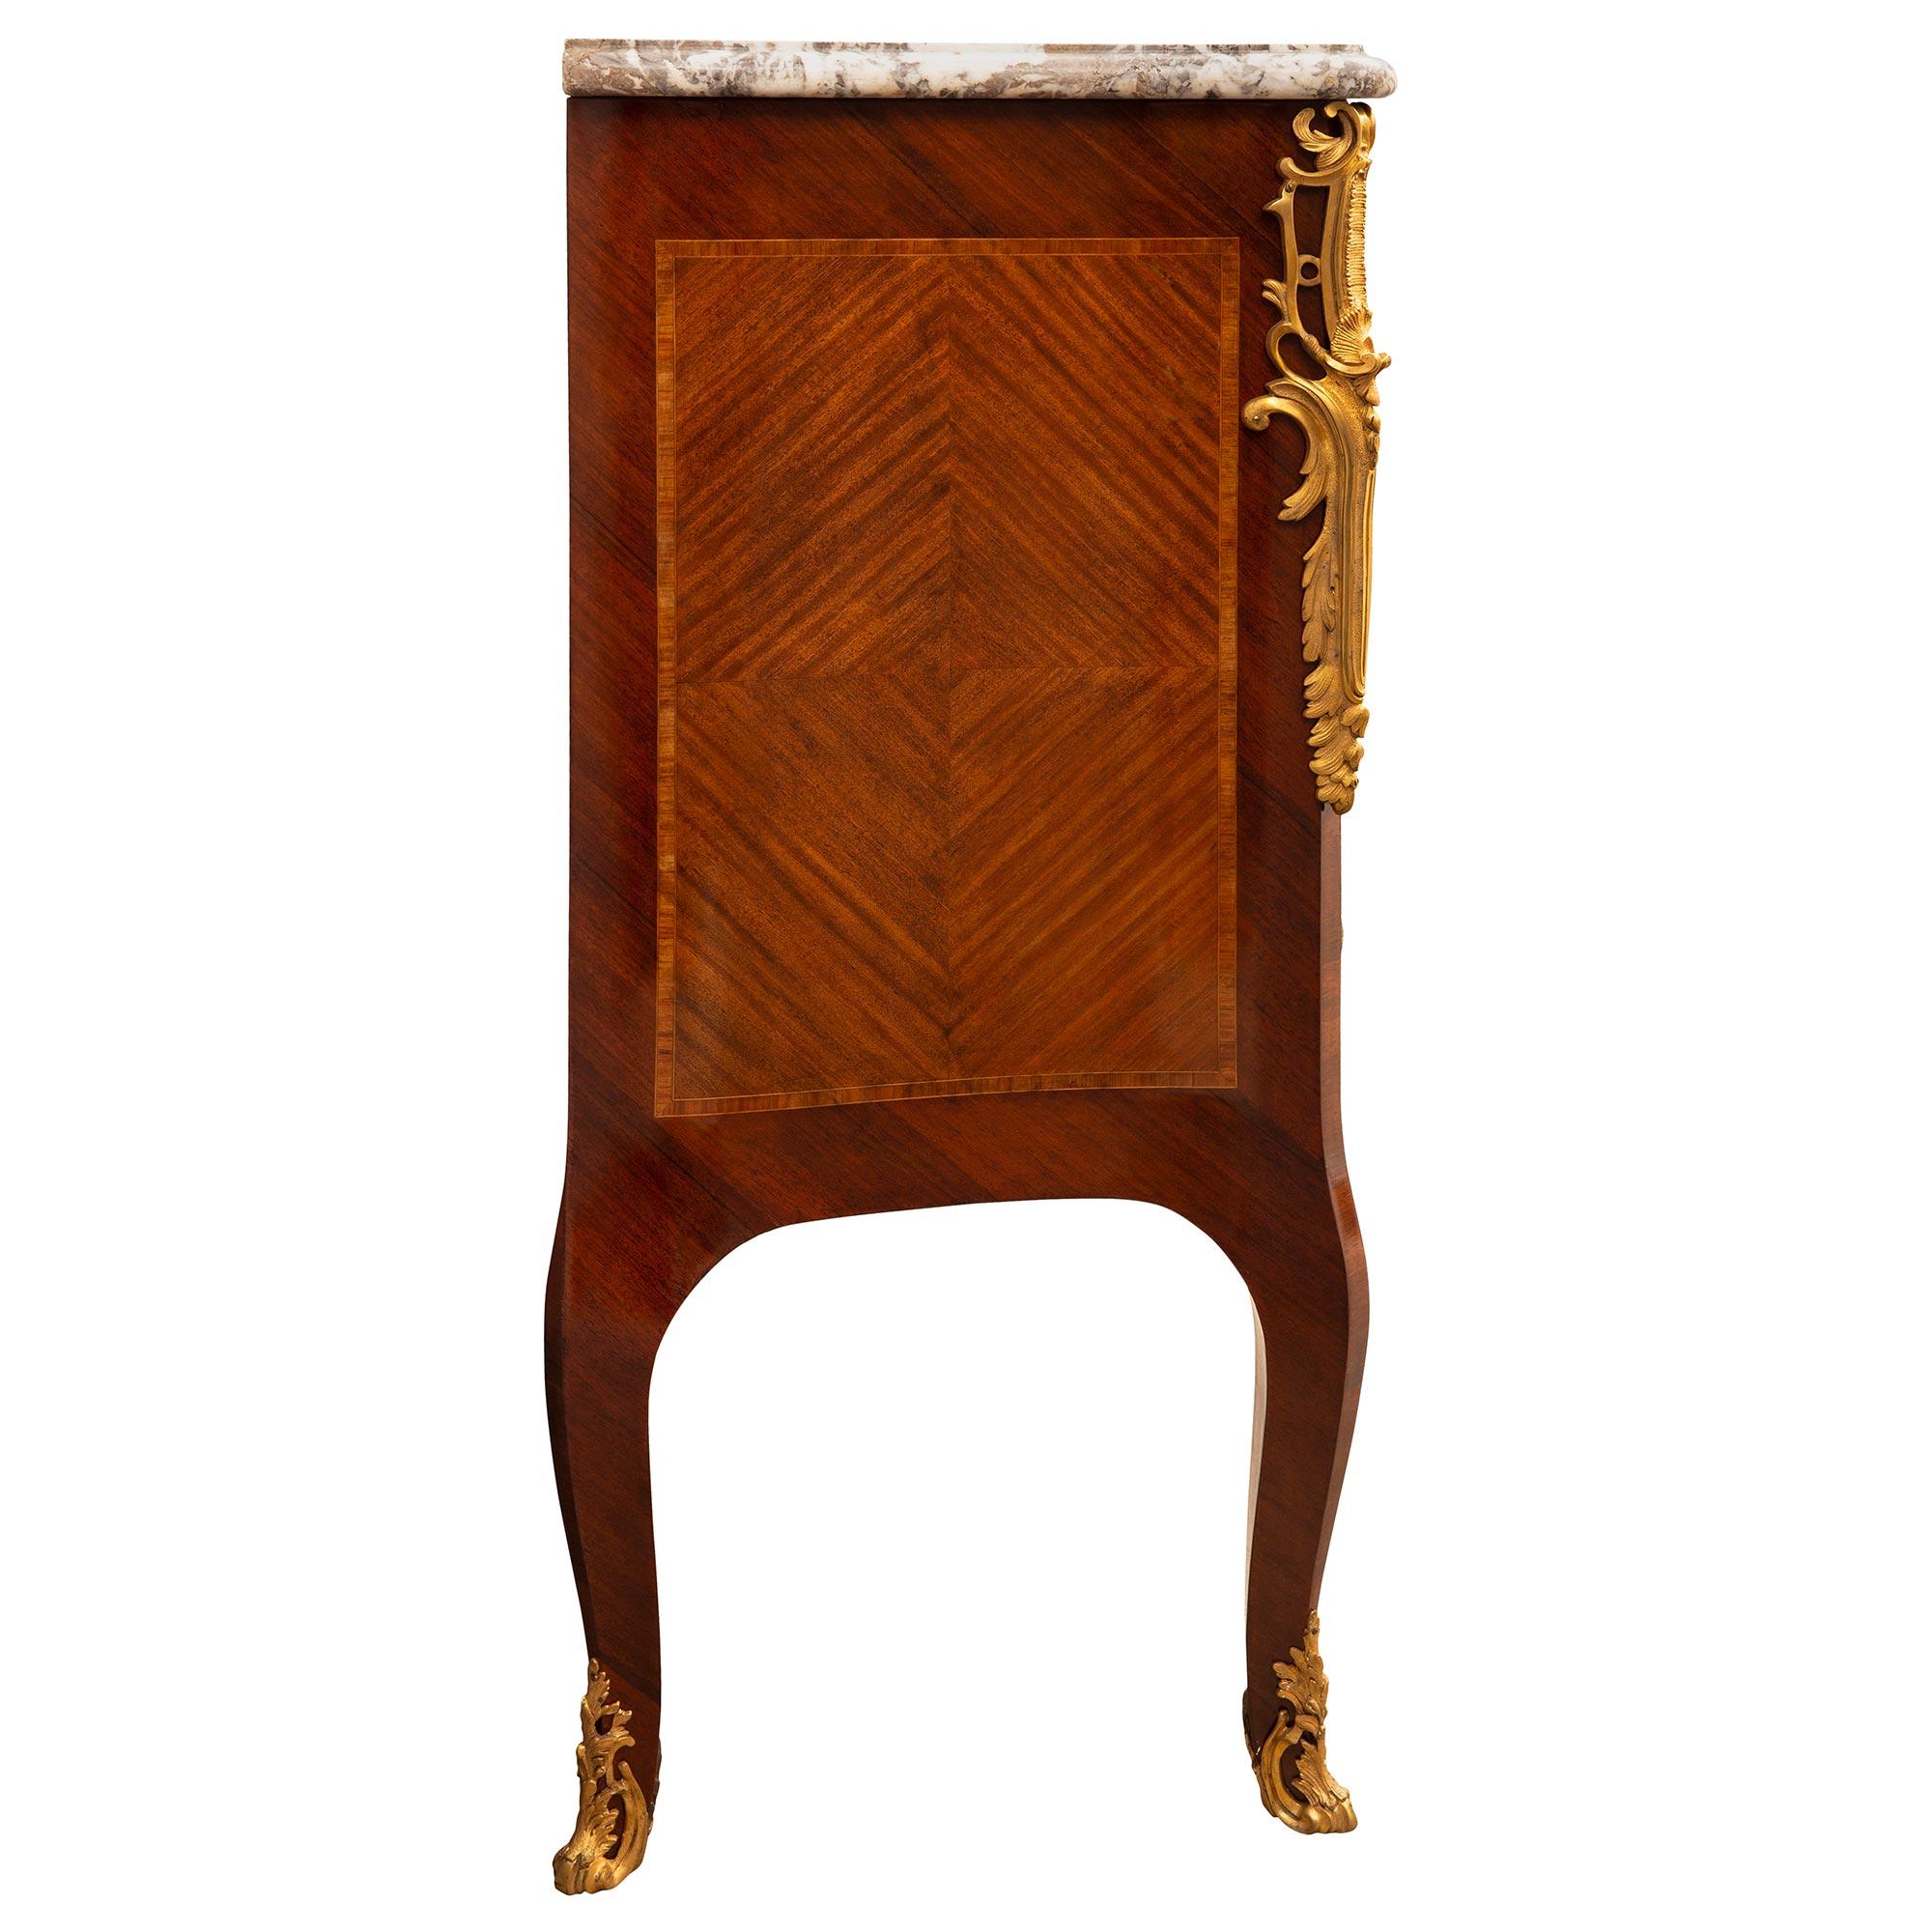 French 19th Century Louis XV St. Kingwood, Tulipwood, Ormolu and Marble Cabinet For Sale 2